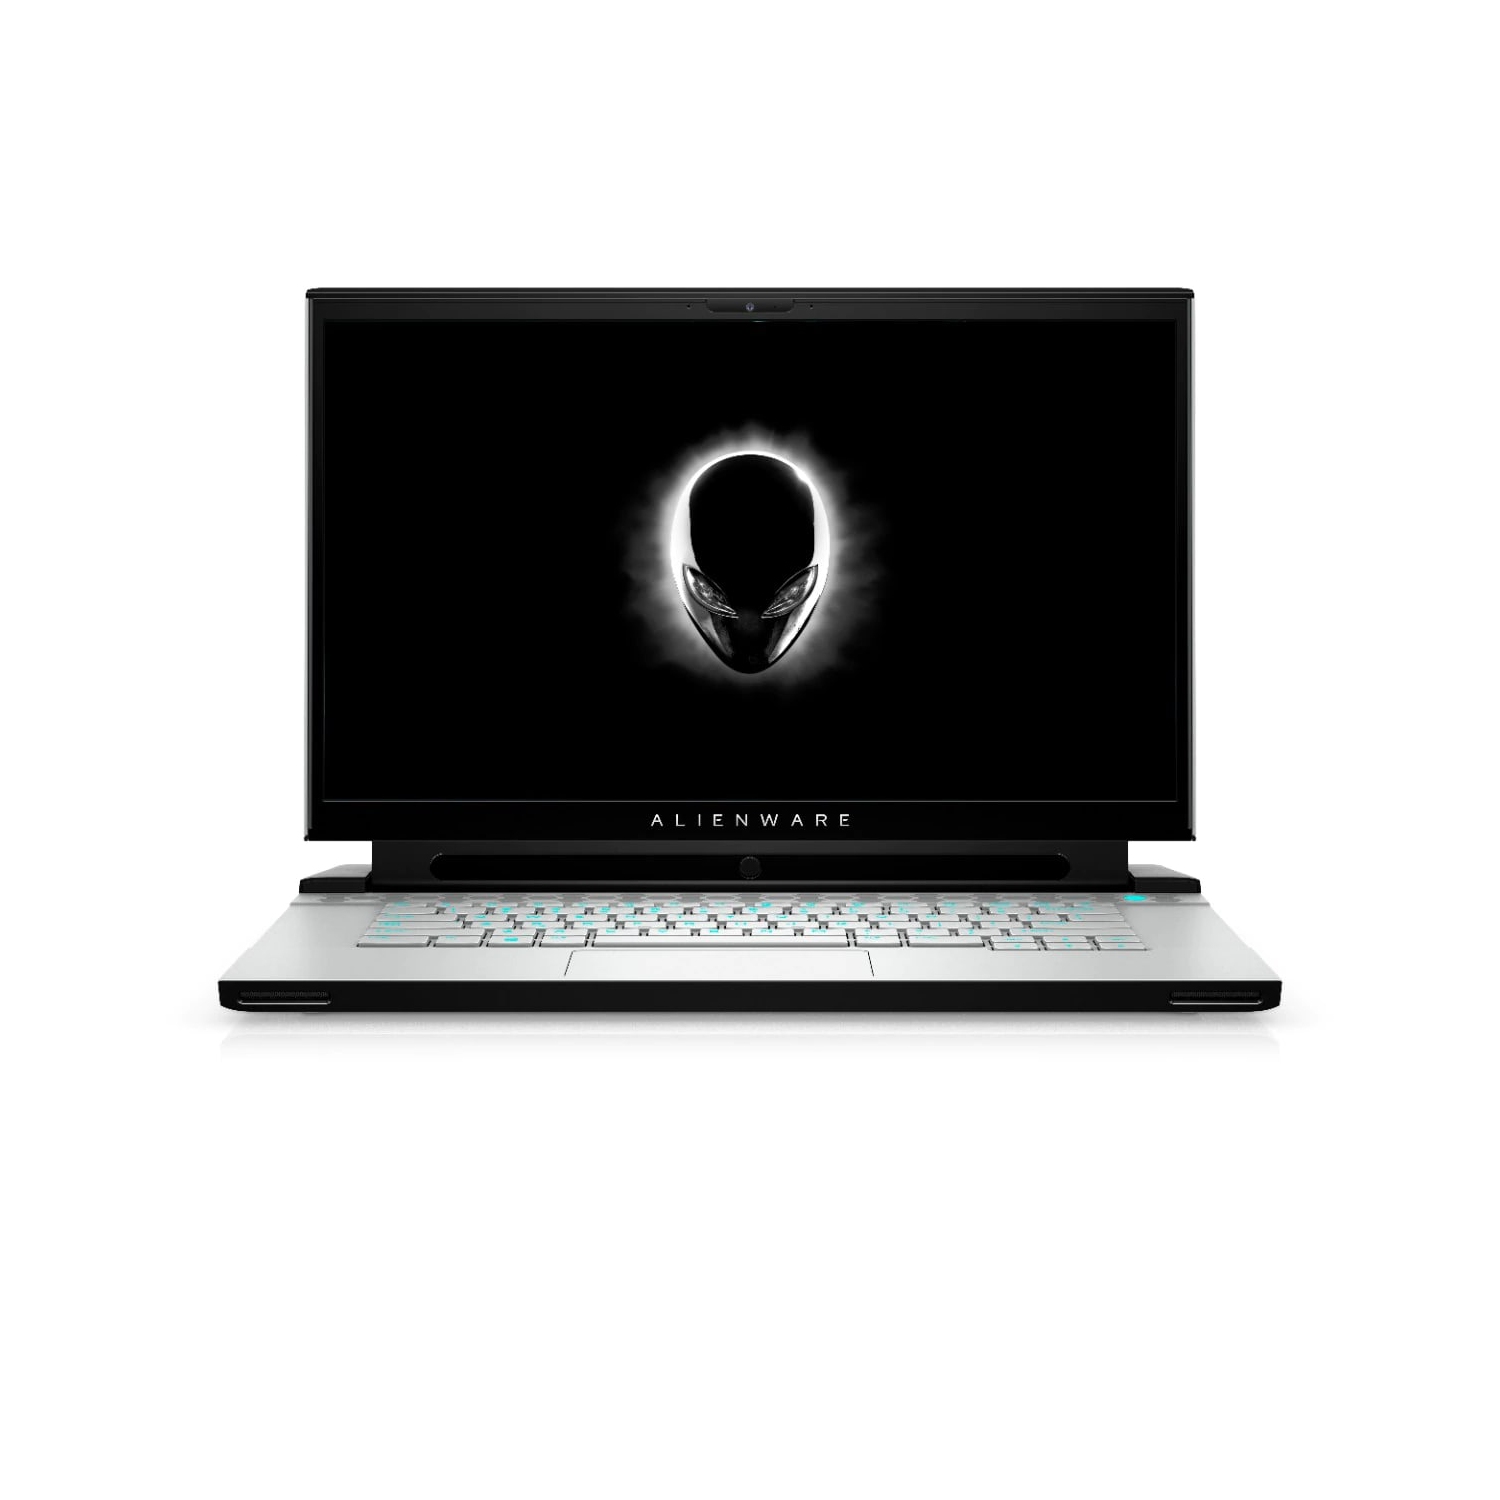 Refurbished (Excellent) - Dell Alienware m15 R3 Gaming Laptop (2020) | 15.6" FHD | Core i7 - 512GB SSD - 16GB RAM | 6 Cores @ 5 GHz - 10th Gen CPU Certified Refurbished